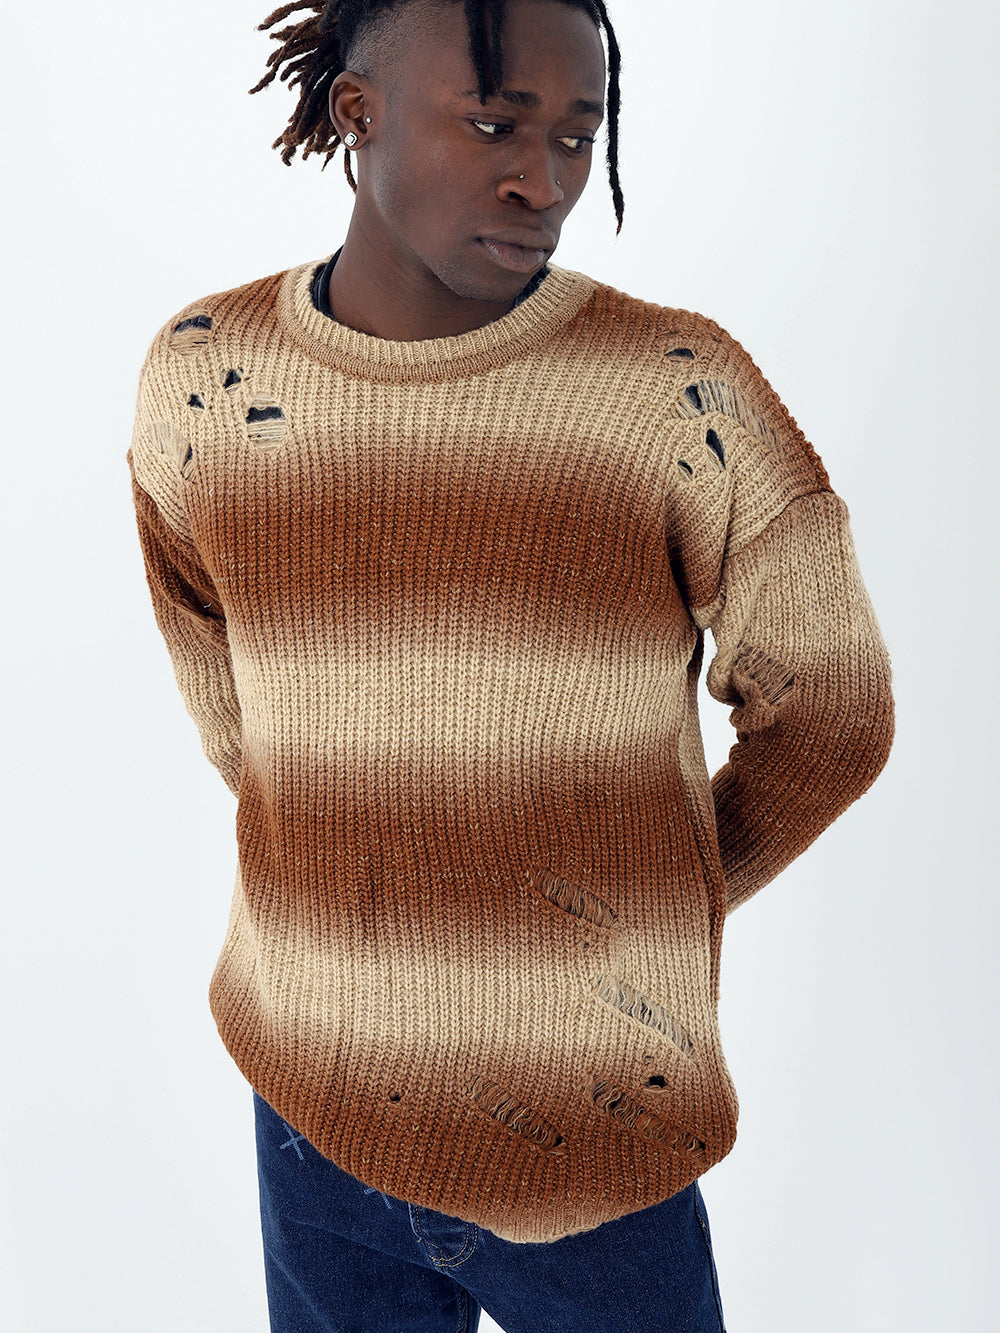 A man with dreadlocks wearing a Distressed Gentleman Sweater | Brown.